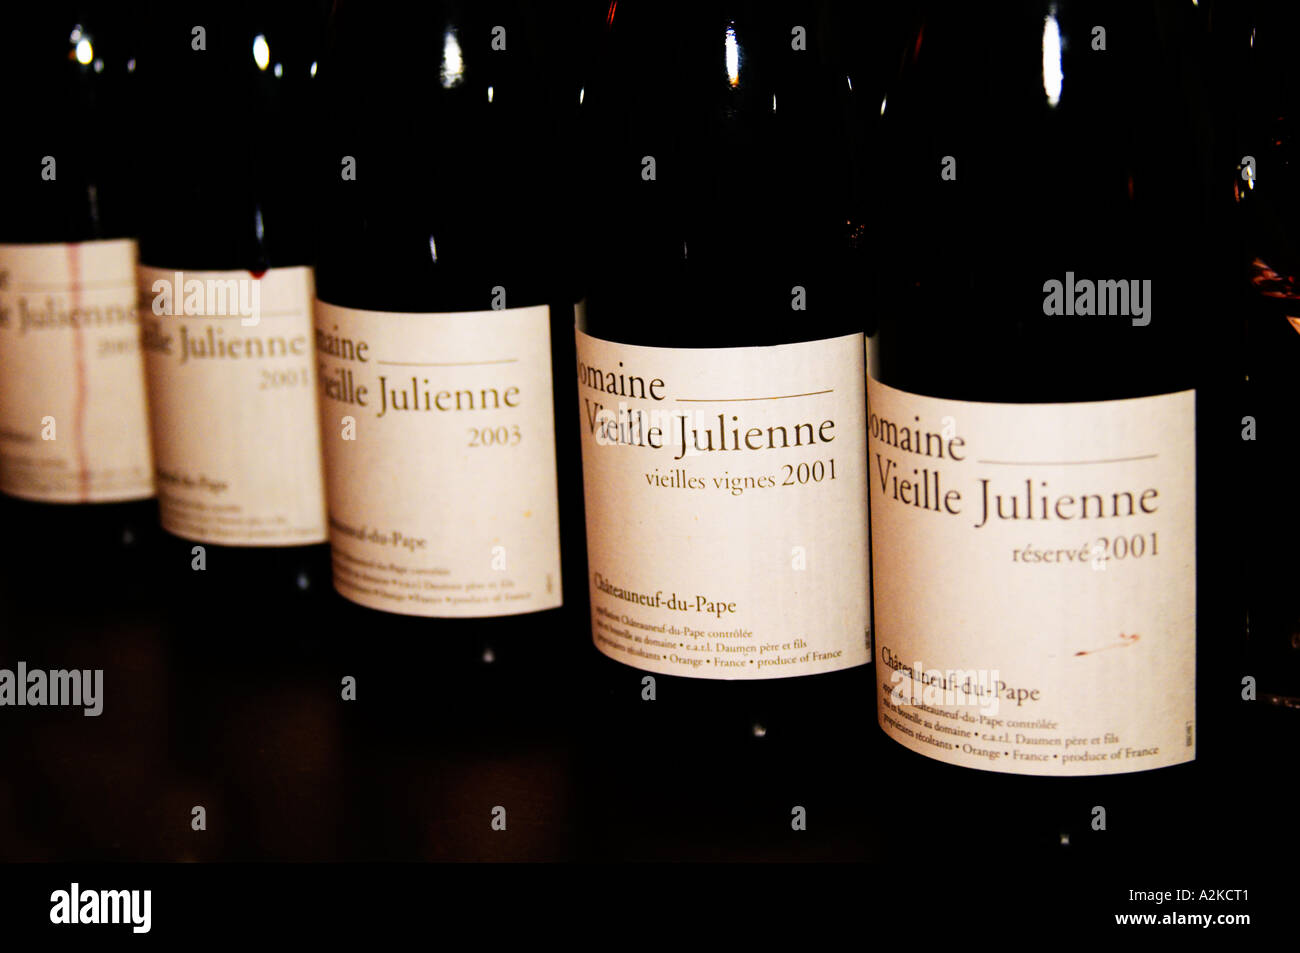 Bottles of Domaine Vieille Julienne Viellies Vignes and Reserve 2001, Chateauneuf-du-Pape, Vaucluse, Provence, France, Europe Stock Photo